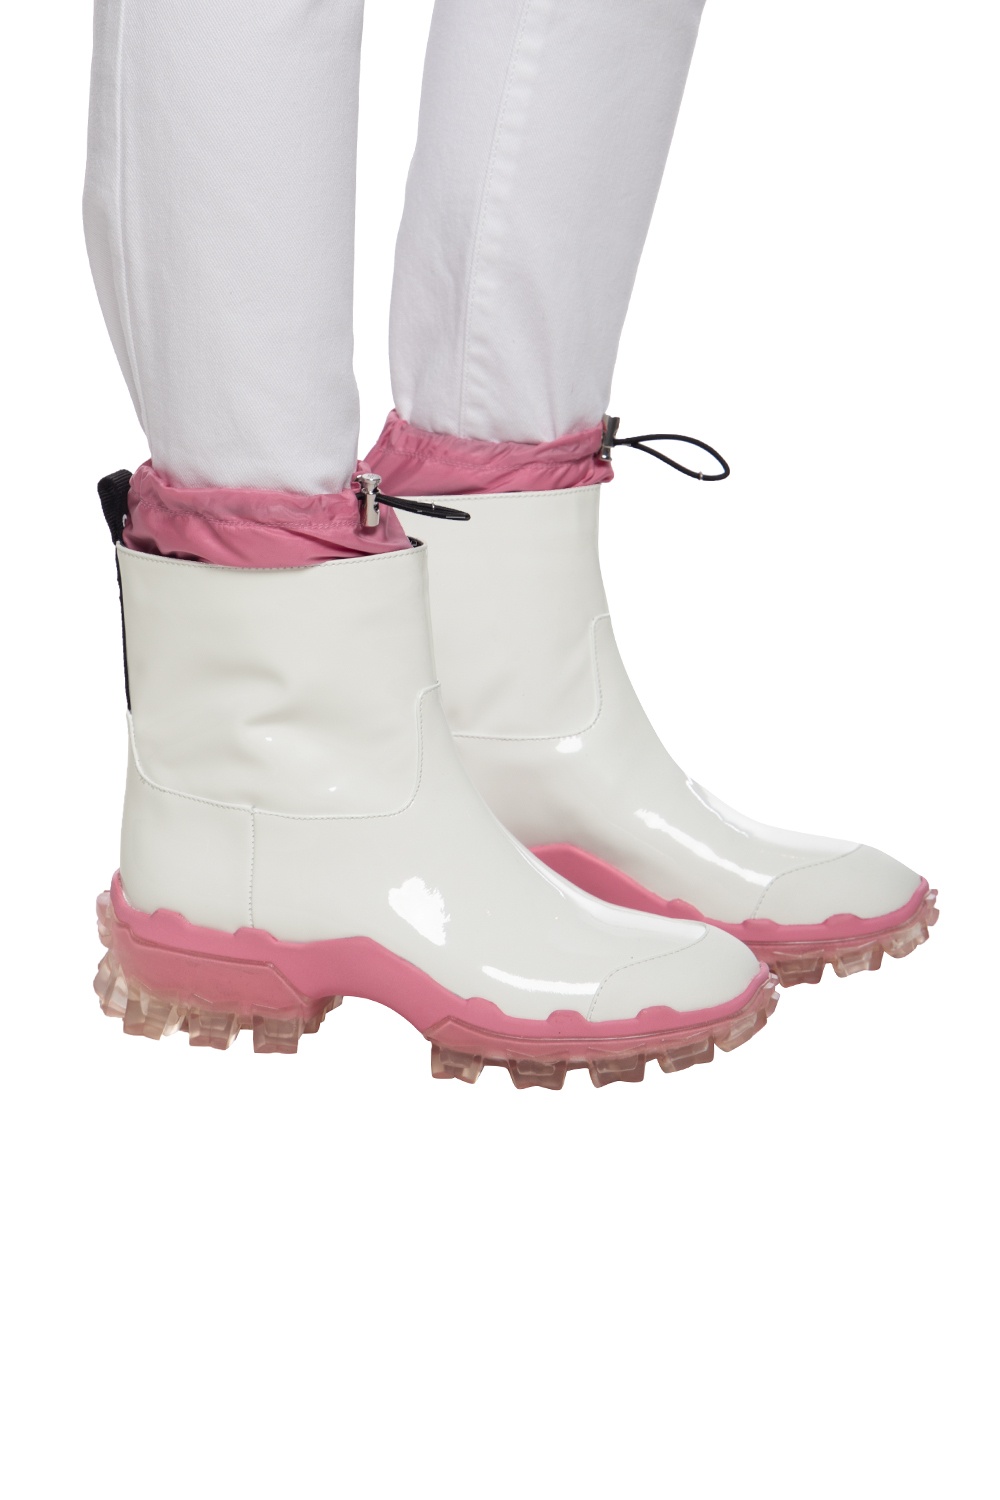 moncler pink boots